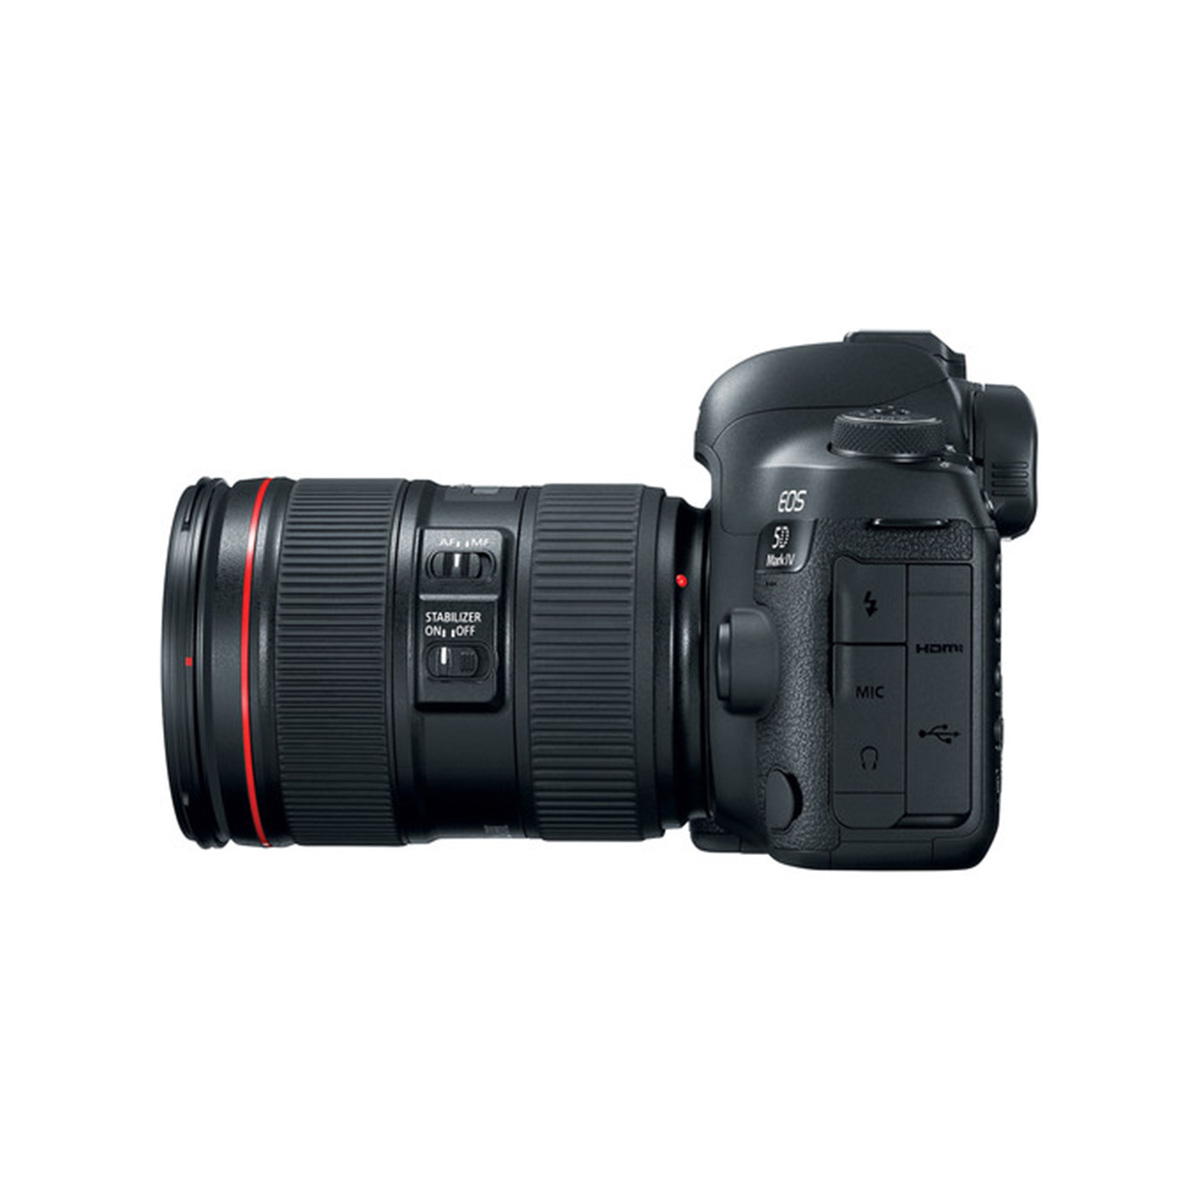 Canon EOS 5D Mark IV DSLR Camera with 24-105mm